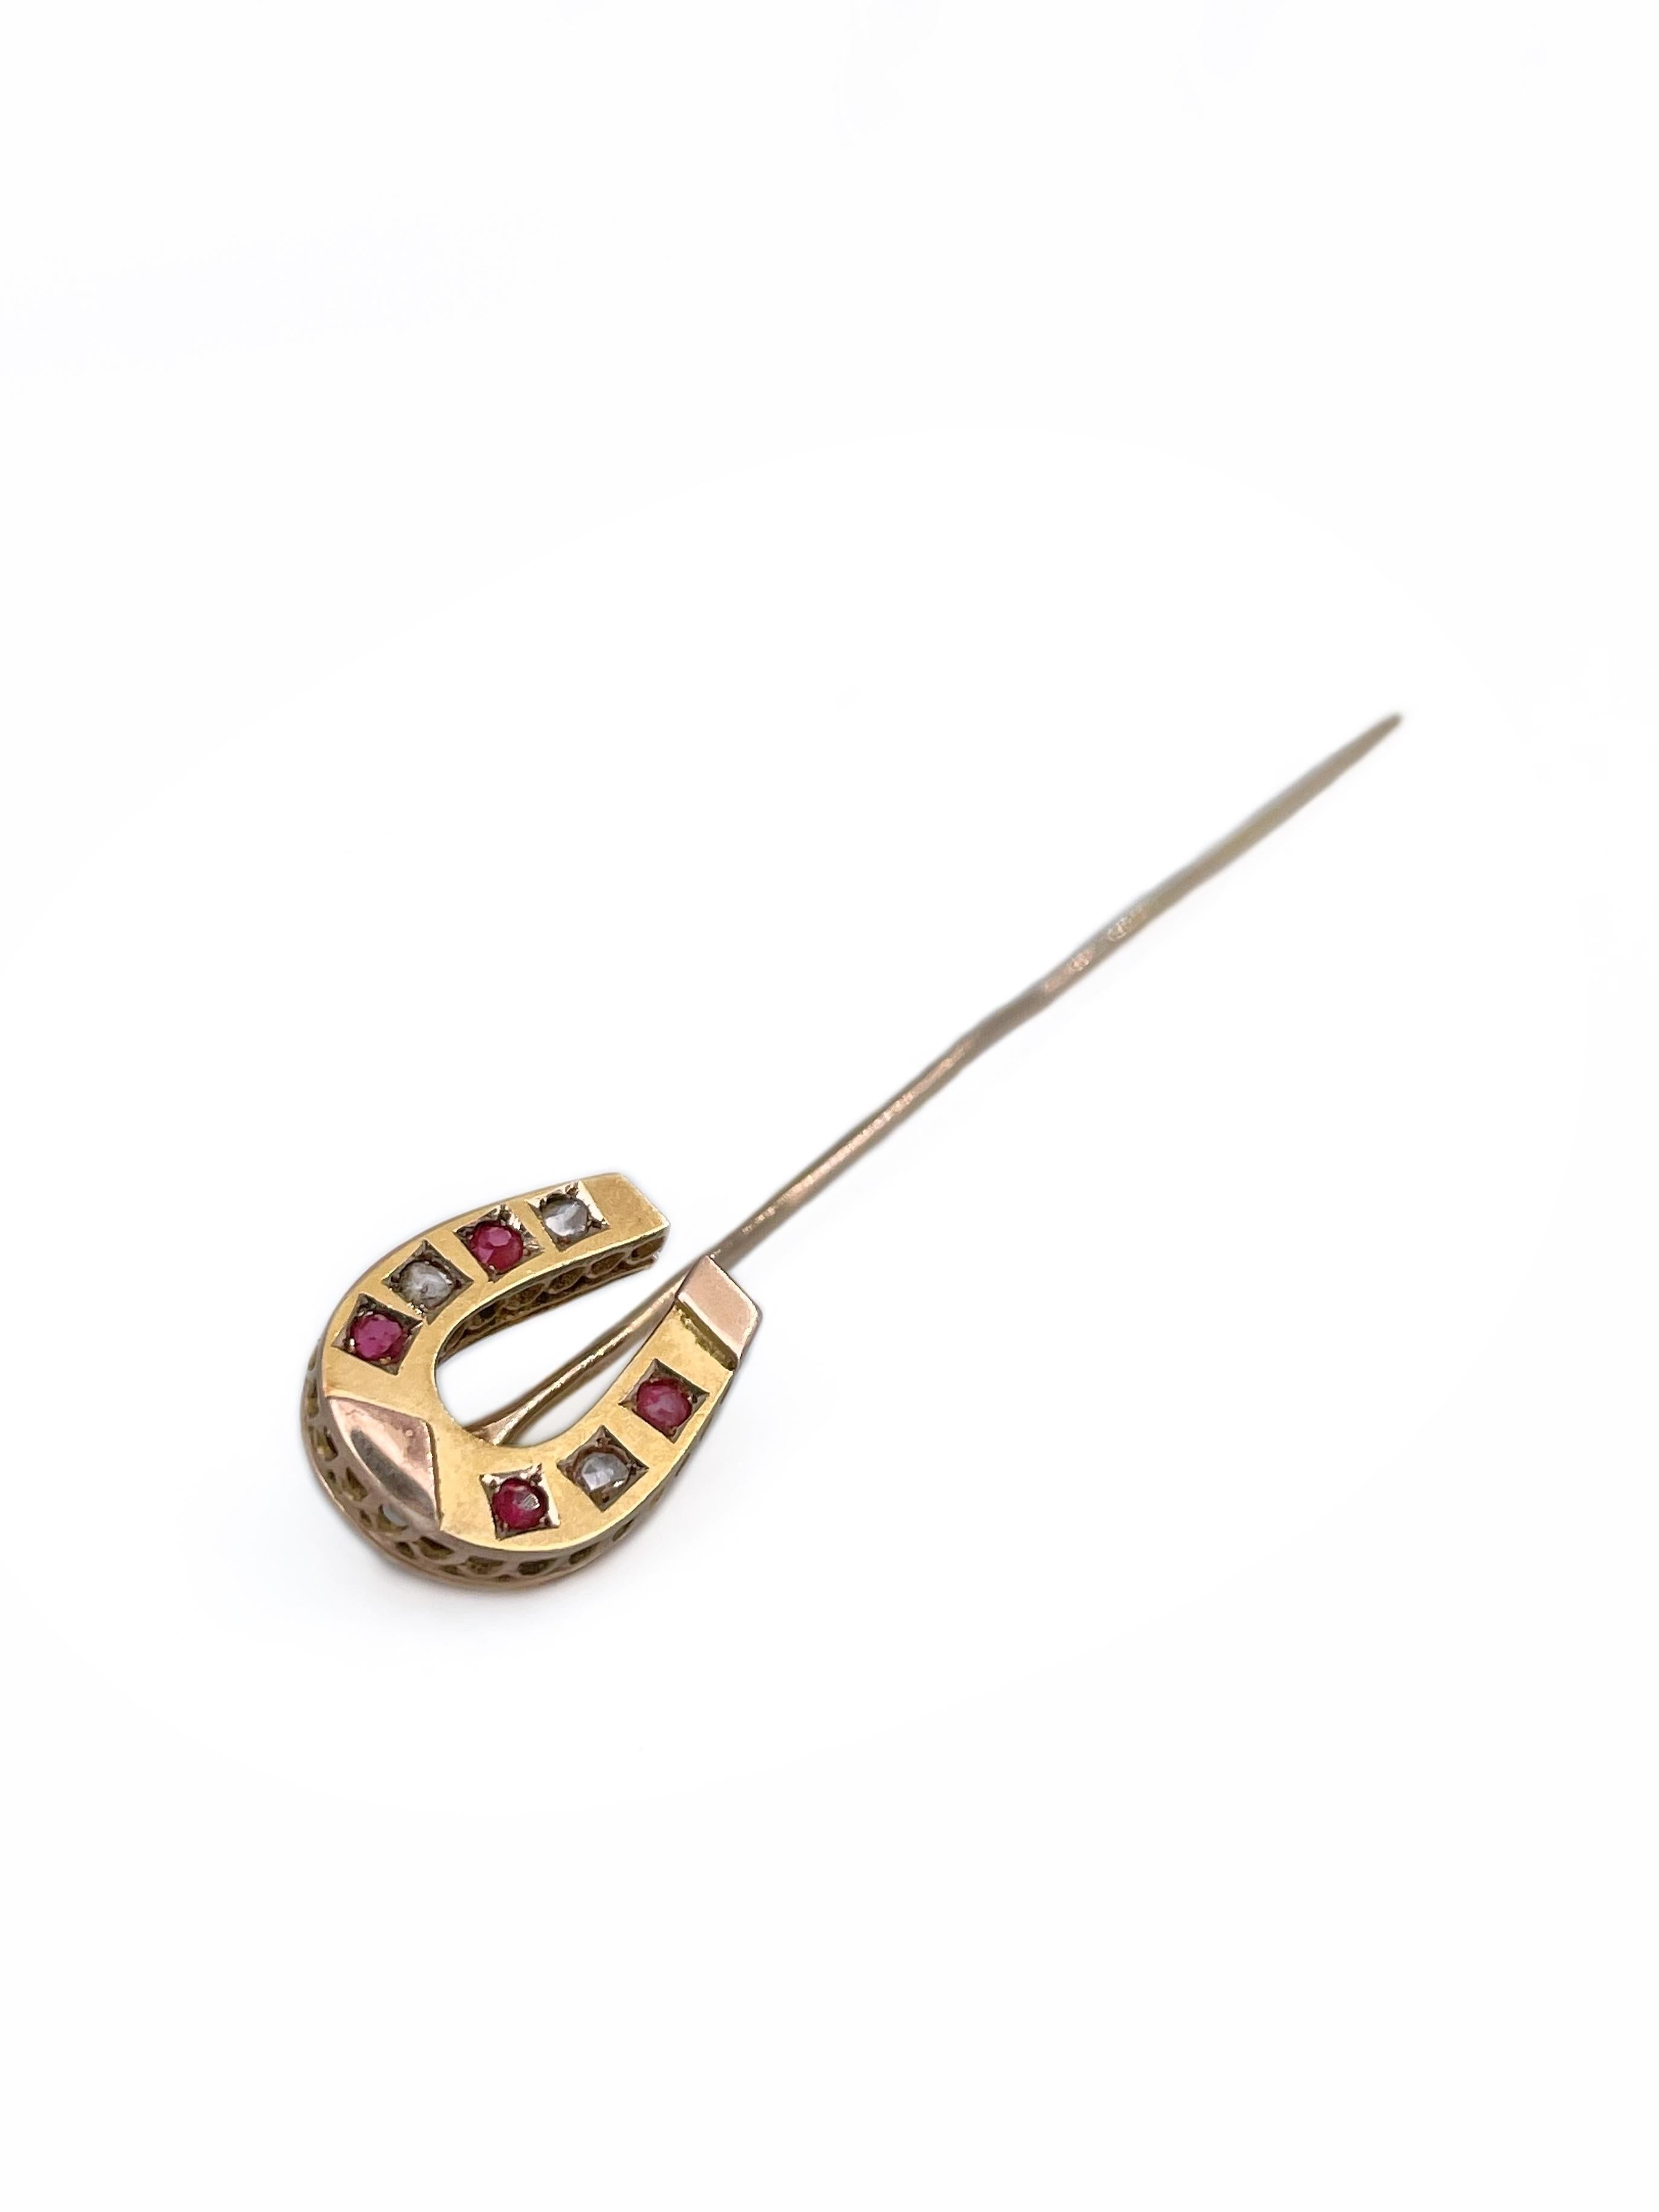 Victorian 18 Karat Gold Rose Cut Diamond Red Paste Horseshoe Stick Pin Brooch In Good Condition For Sale In Vilnius, LT